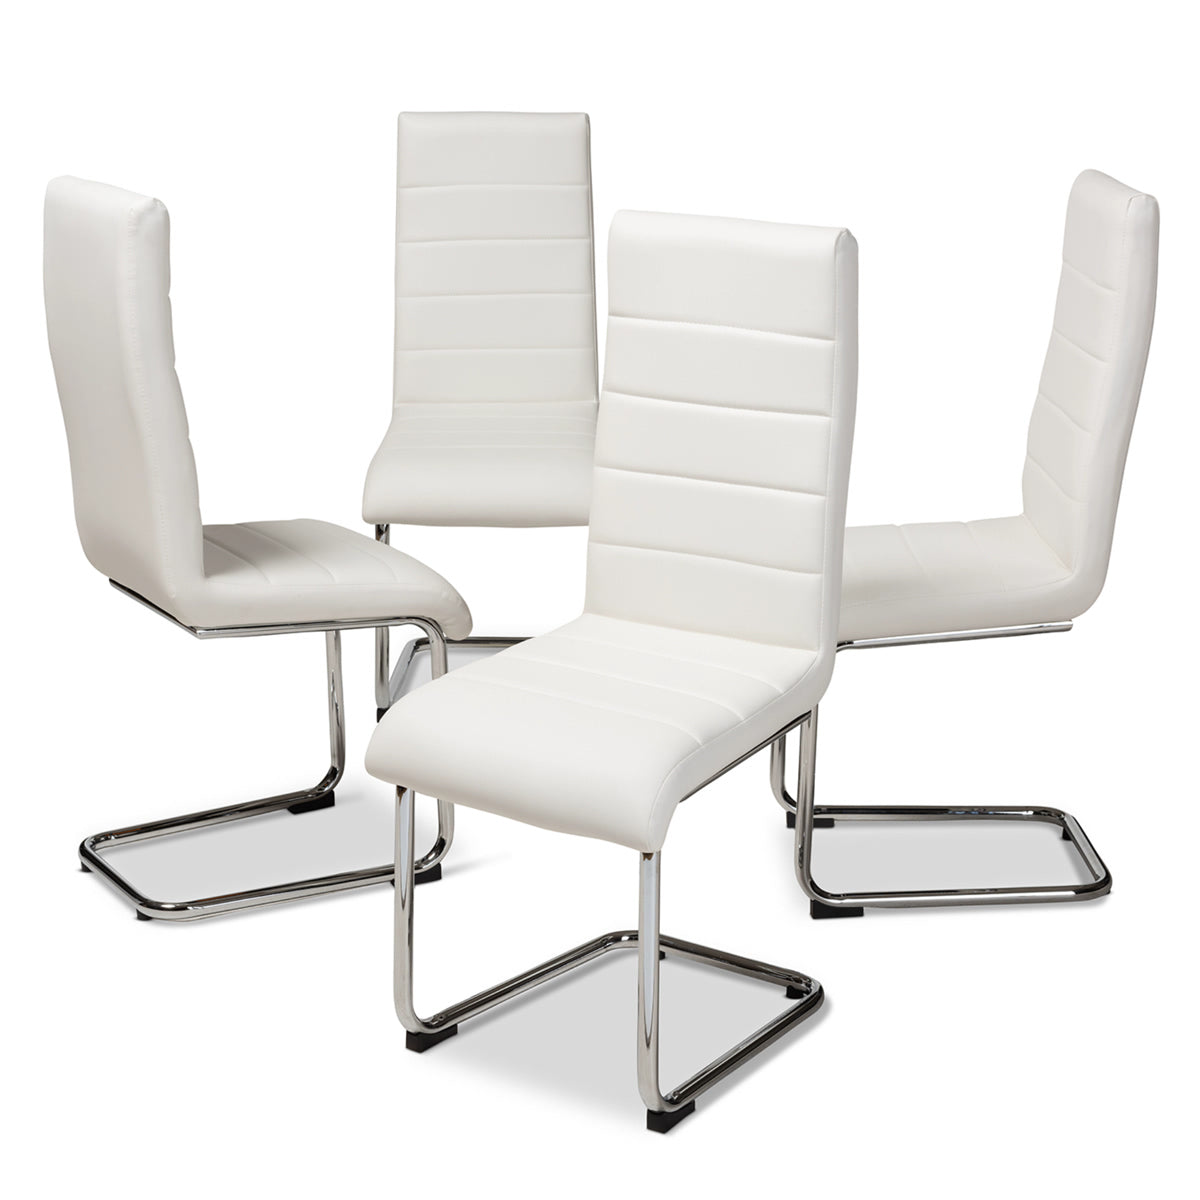 Baxton Studio Marlys Modern and Contemporary White Faux Leather Upholstered Dining Chair (Set of 4) Baxton Studio-dining chair-Minimal And Modern - 1